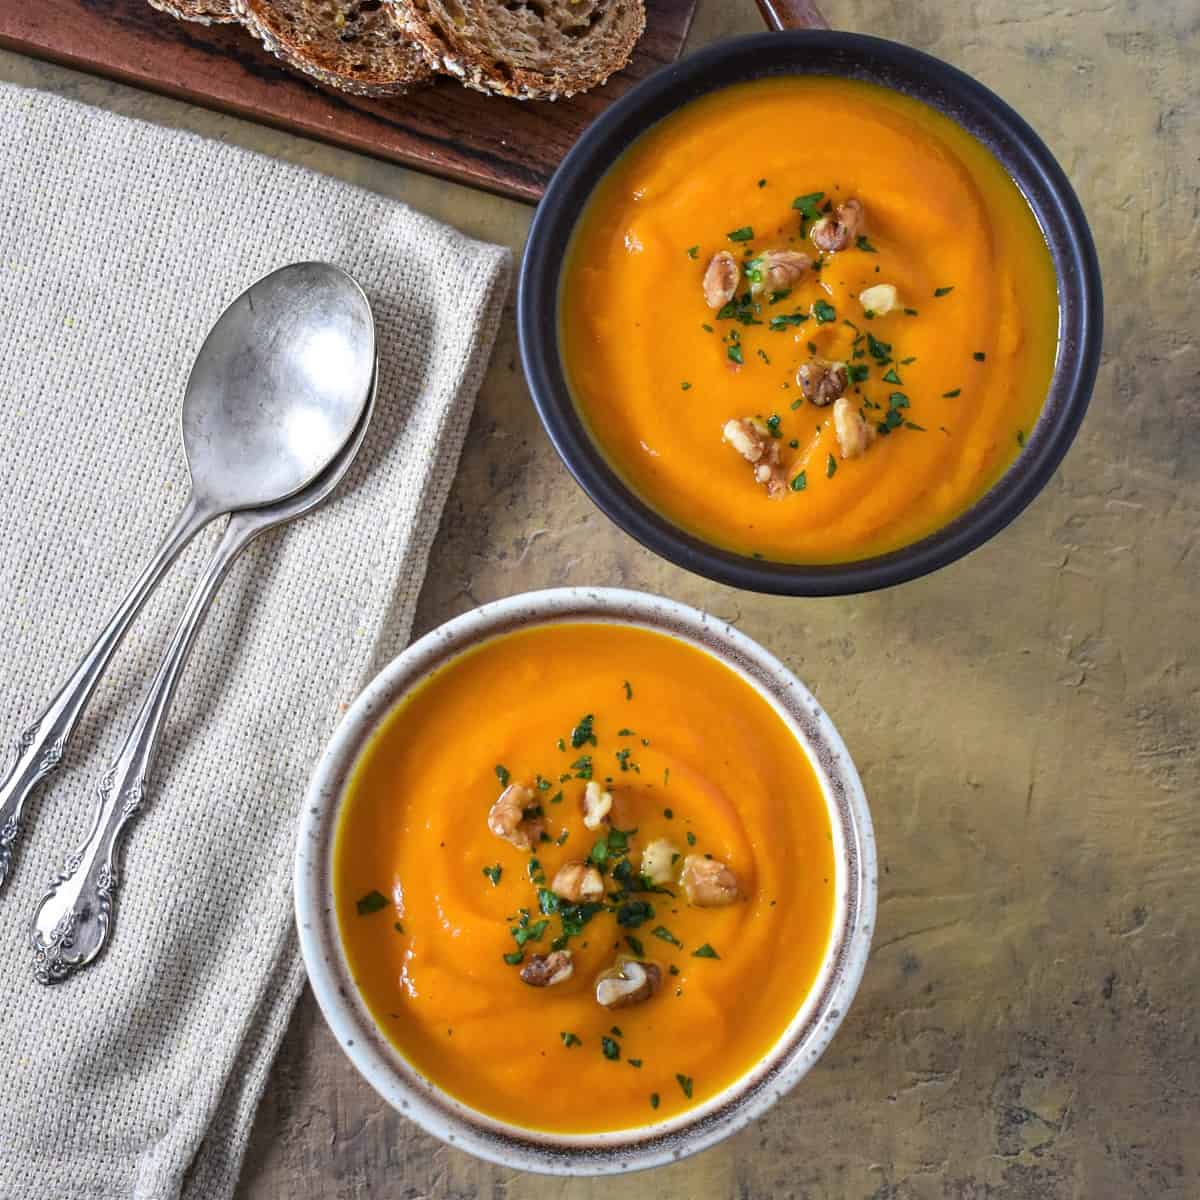 Two carrot sweet potato soups served in small bowls and garnished with parsley and chopped walnuts with bread slices in the background.